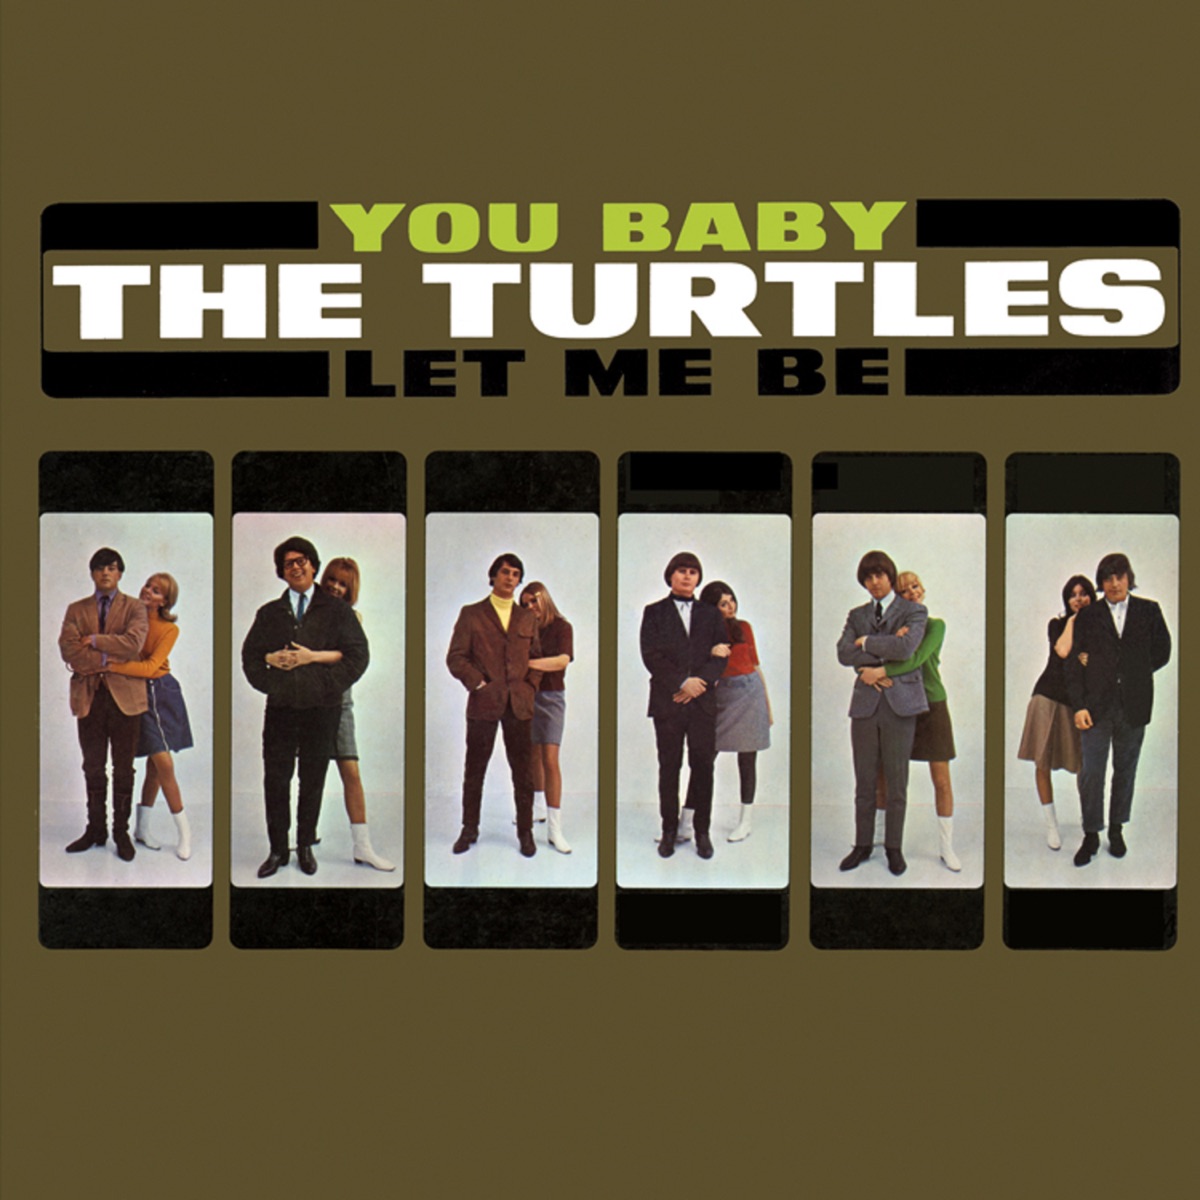 The Turtles - The Turtles Greatest Hits Full Album - The Turtles